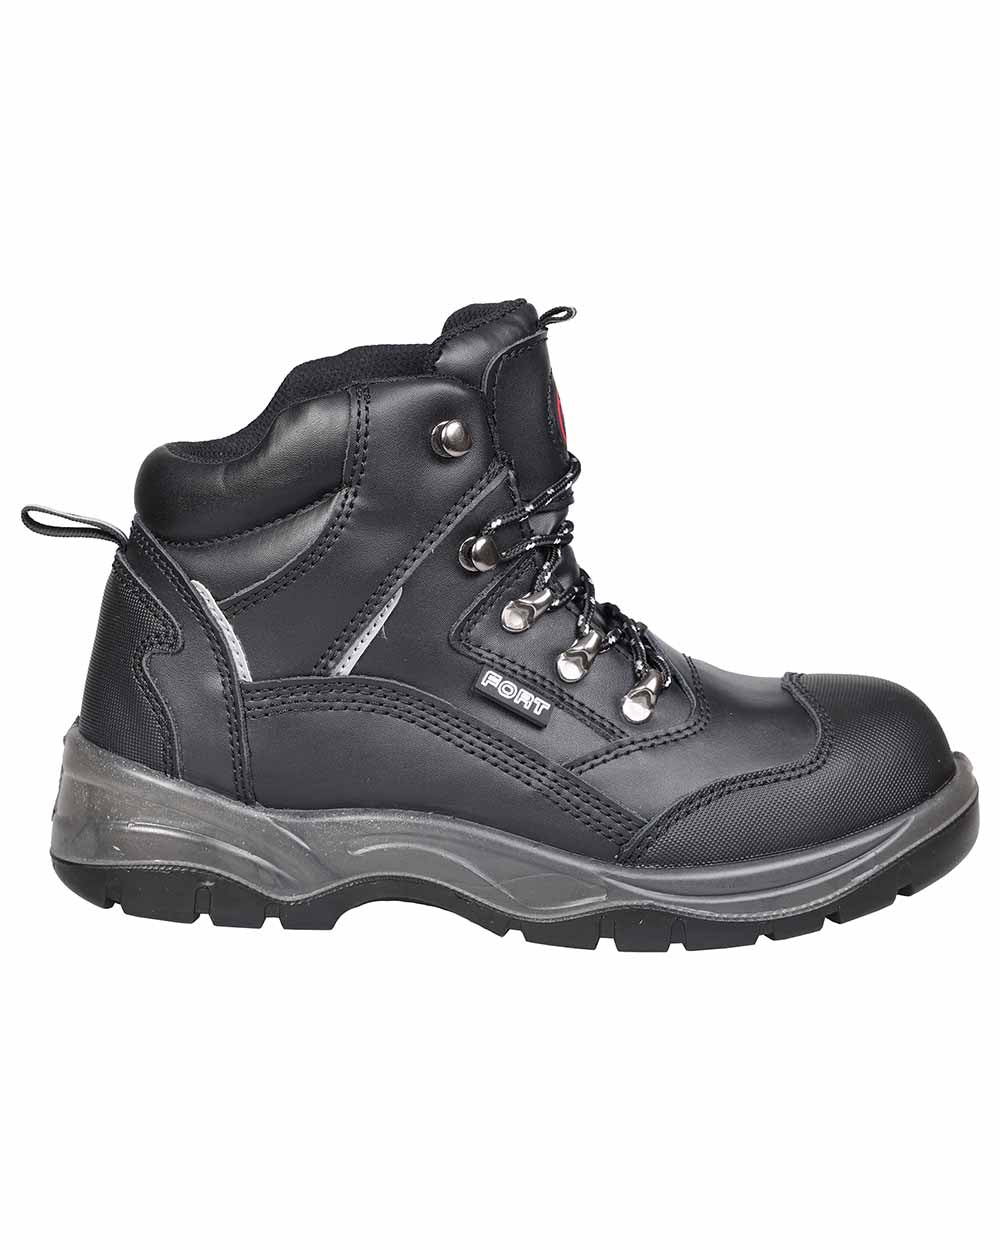 Speed lacing system Fort Knox Safety Boot in Black 